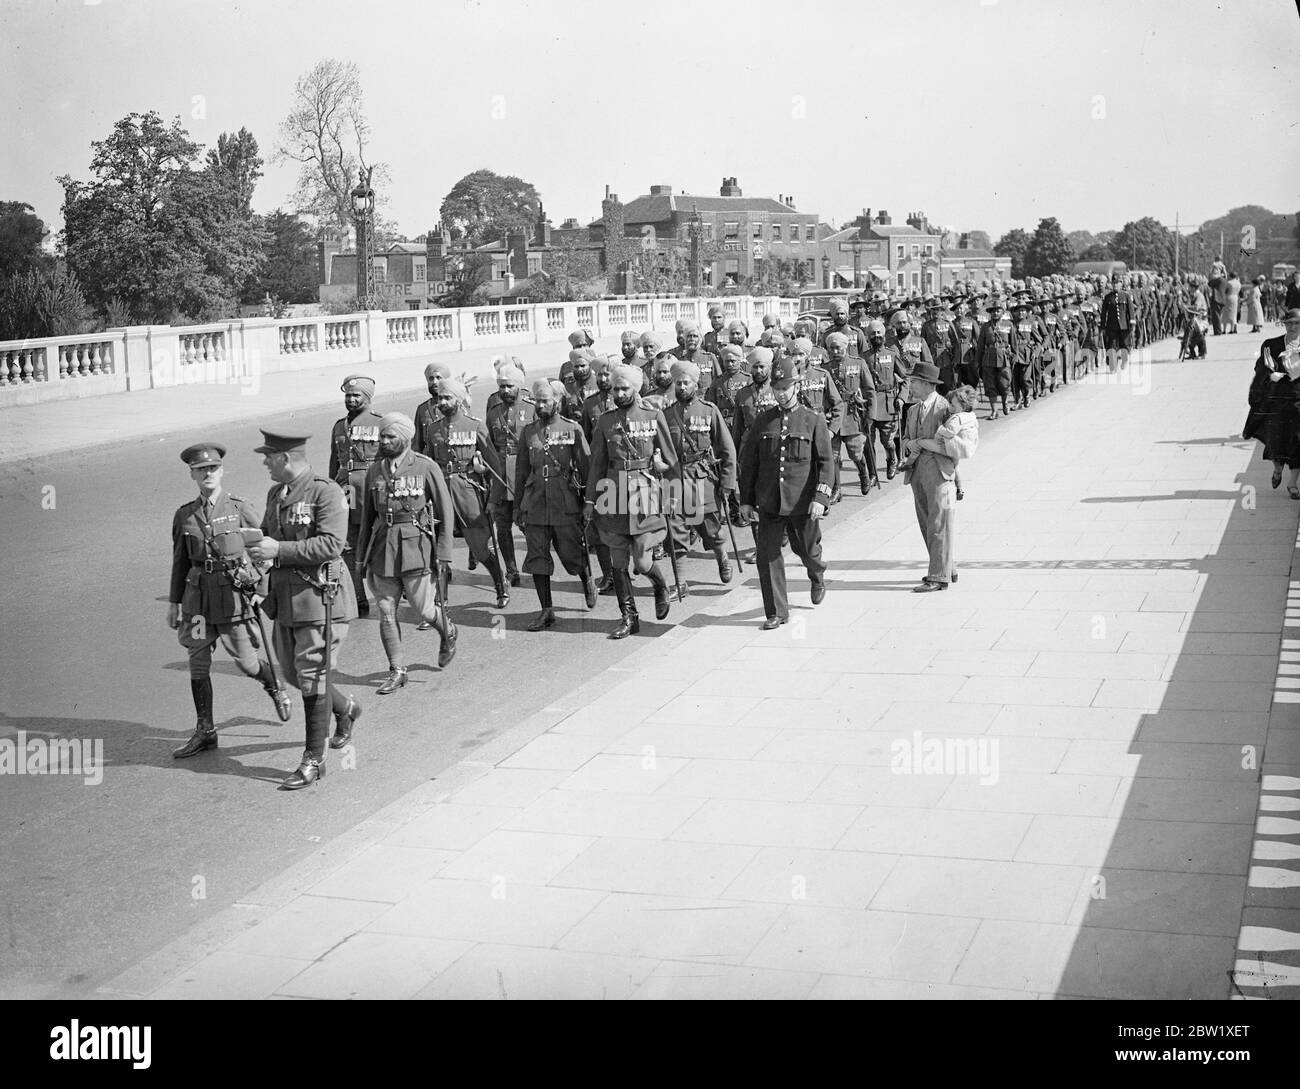 Indian Coronation contingent leaves Hampton Court for home. Members of Indian and Burma Coronation Contingent left their encampment at Hampton Court and entrained for Southampton where they will embark on Neuralia for home. There are 600 men in the contingent. Photo shows: the contingent marching over Hampton Court Bridge. 25 May 1937 Stock Photo